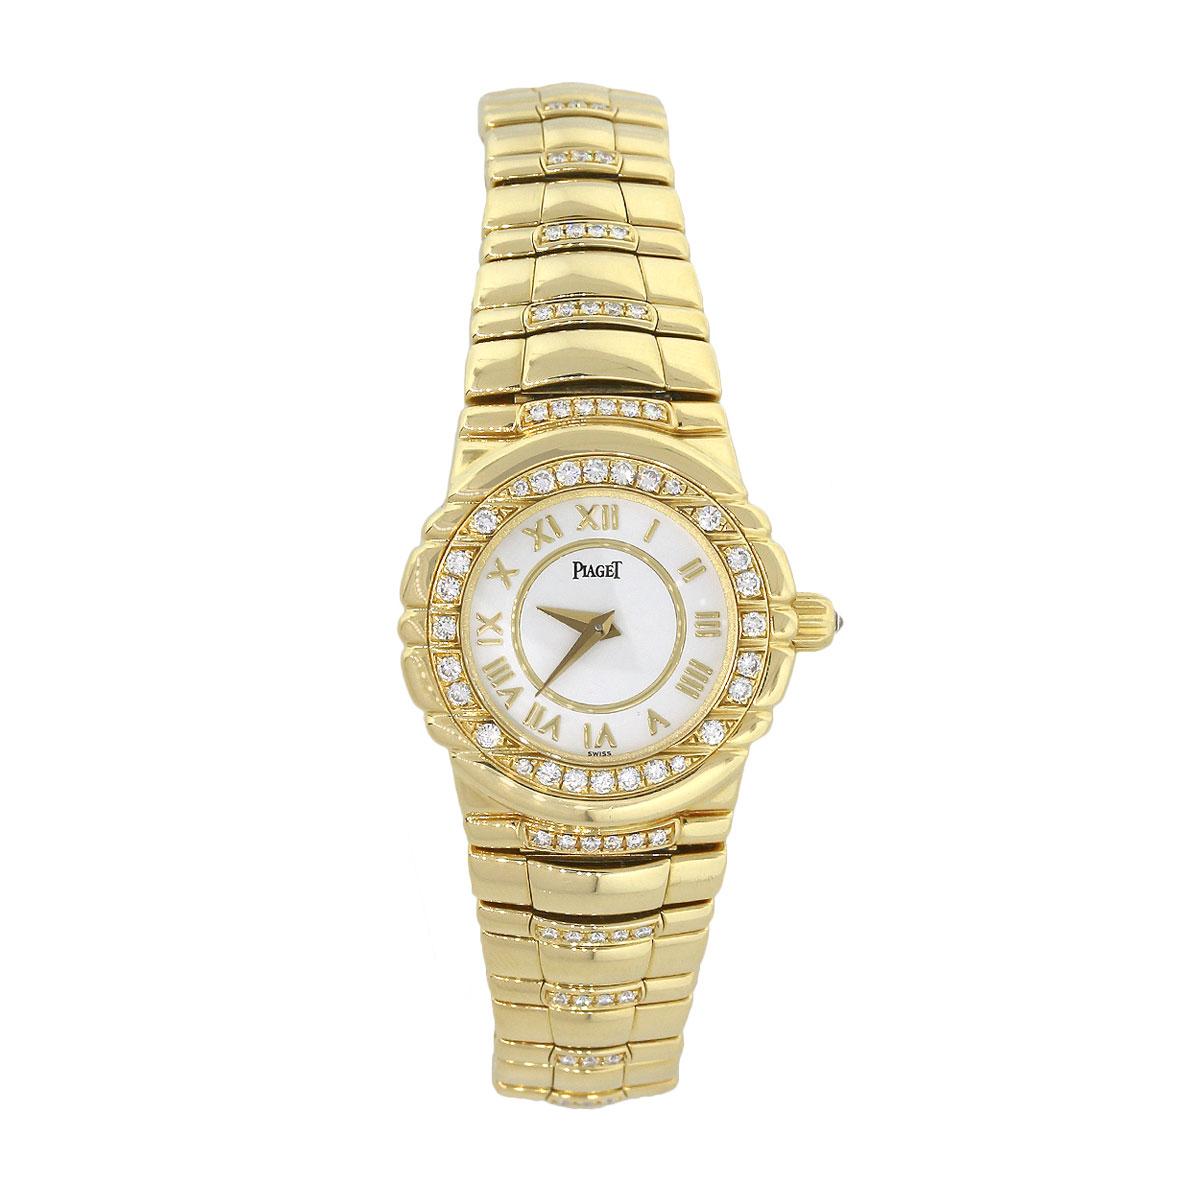 Brand: Piaget
Case Material: 18k yellow gold
Case Diameter: 21mm
Crystal: Sapphire crystal
Bezel: 18k yellow gold with diamond bezel
Dial: White Dial with yellow gold roman numerals
Bracelet: 18k yellow gold with diamonds
Size: This will fit a 6″